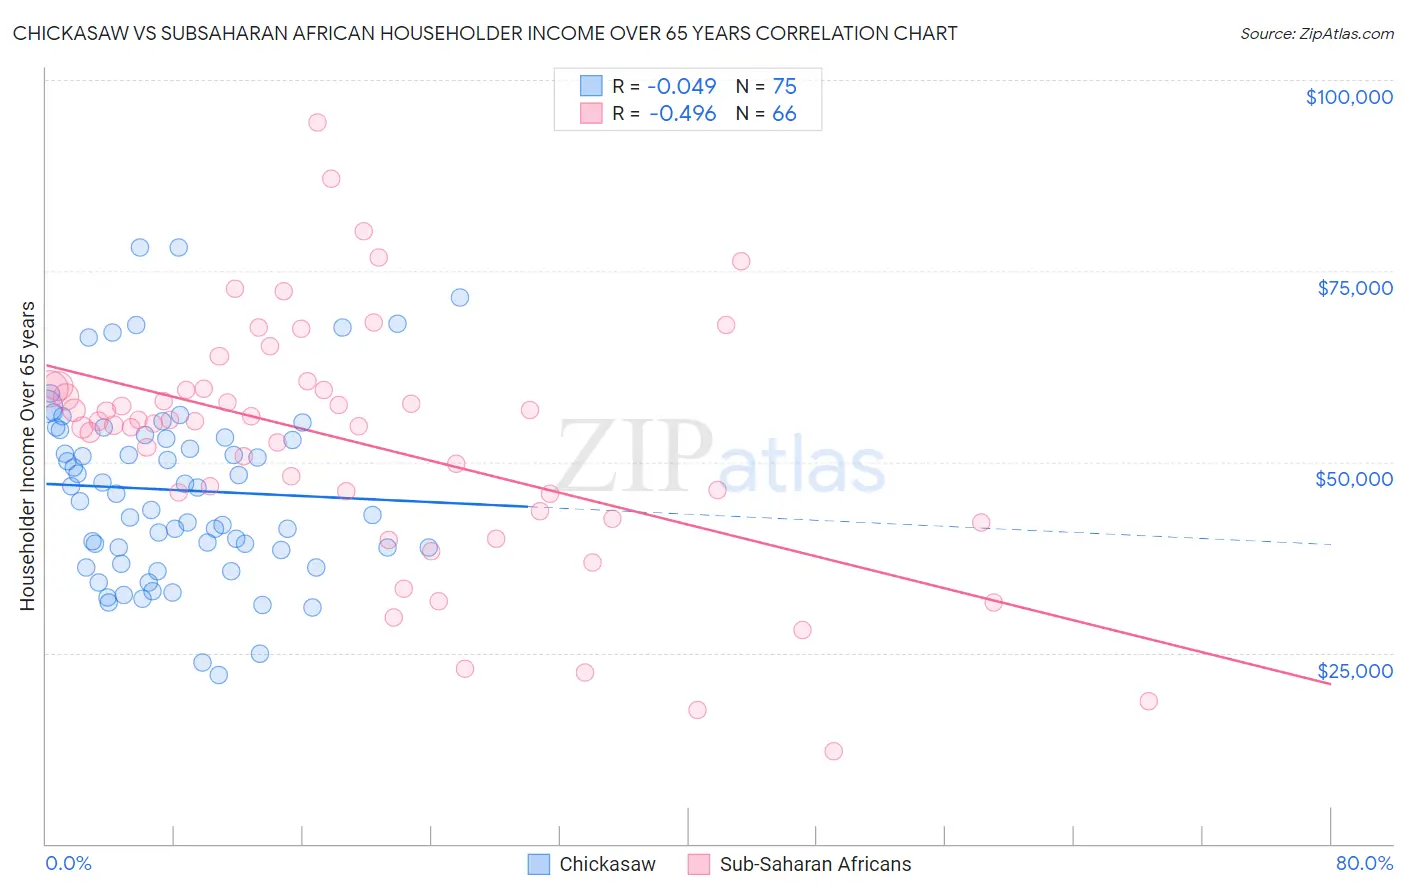 Chickasaw vs Subsaharan African Householder Income Over 65 years